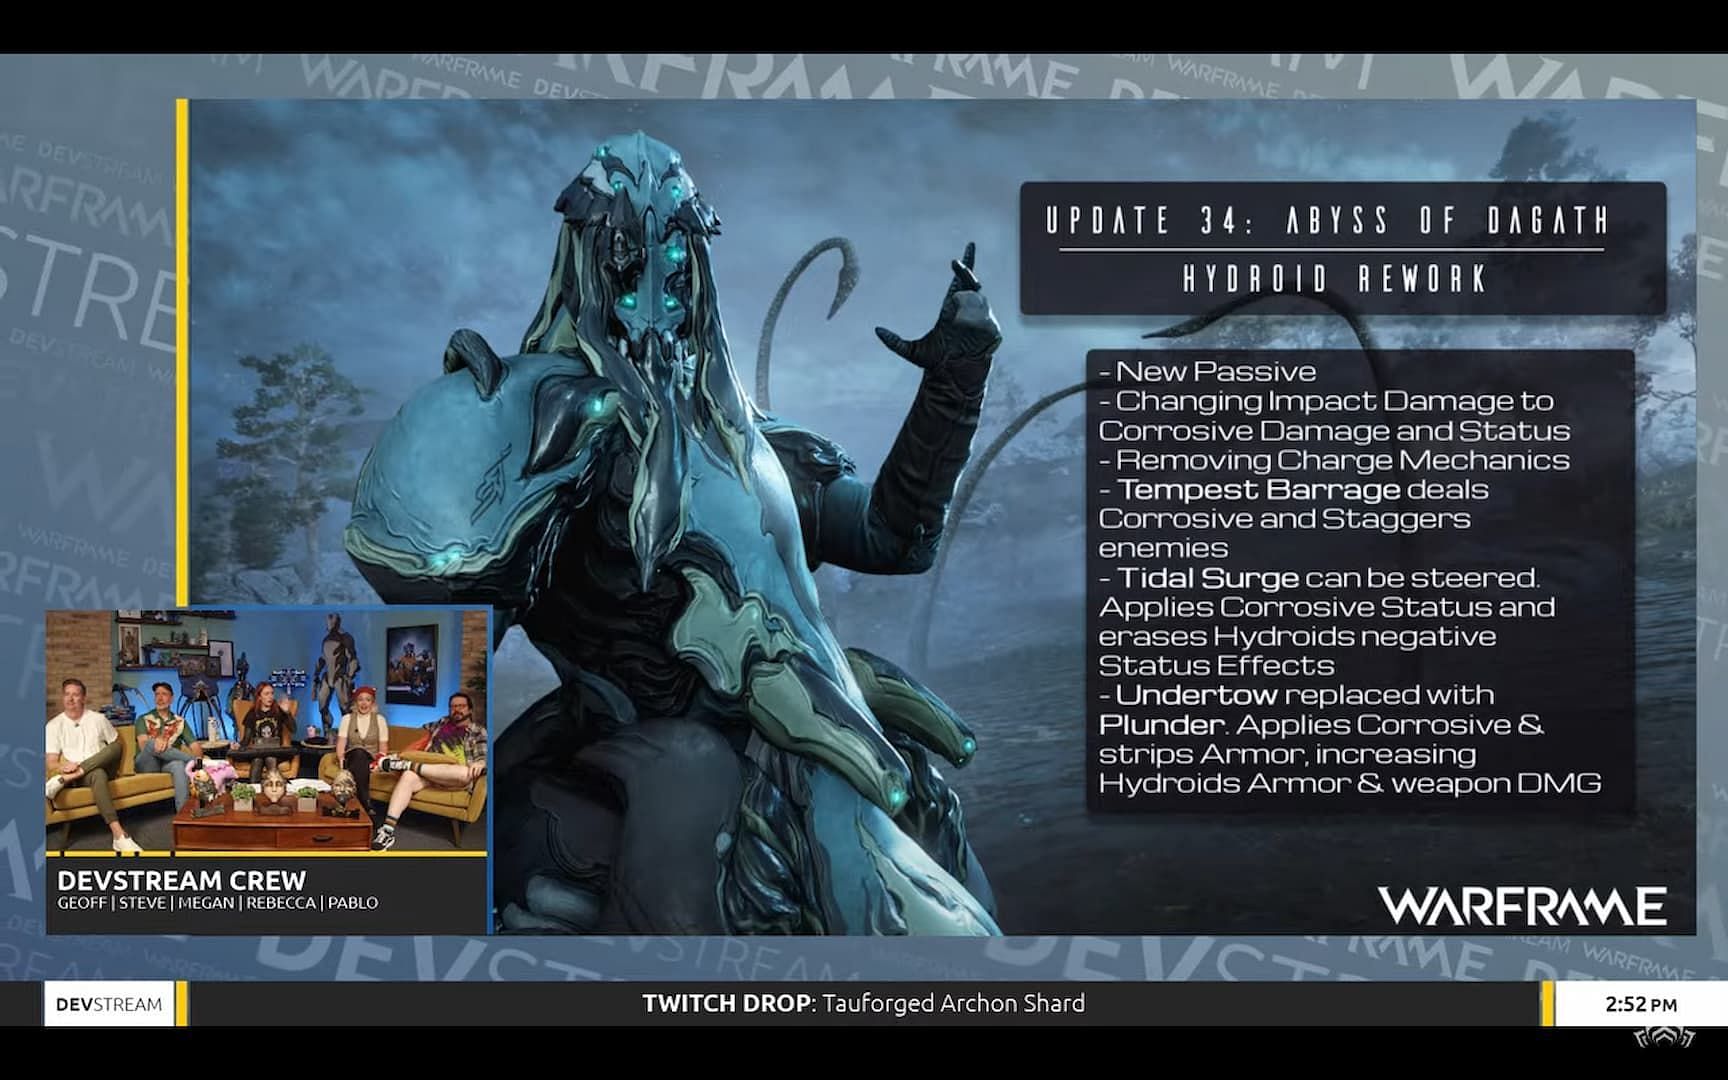 The Undertow ability is now replaced with Plunder (Image via Digital Extremes)